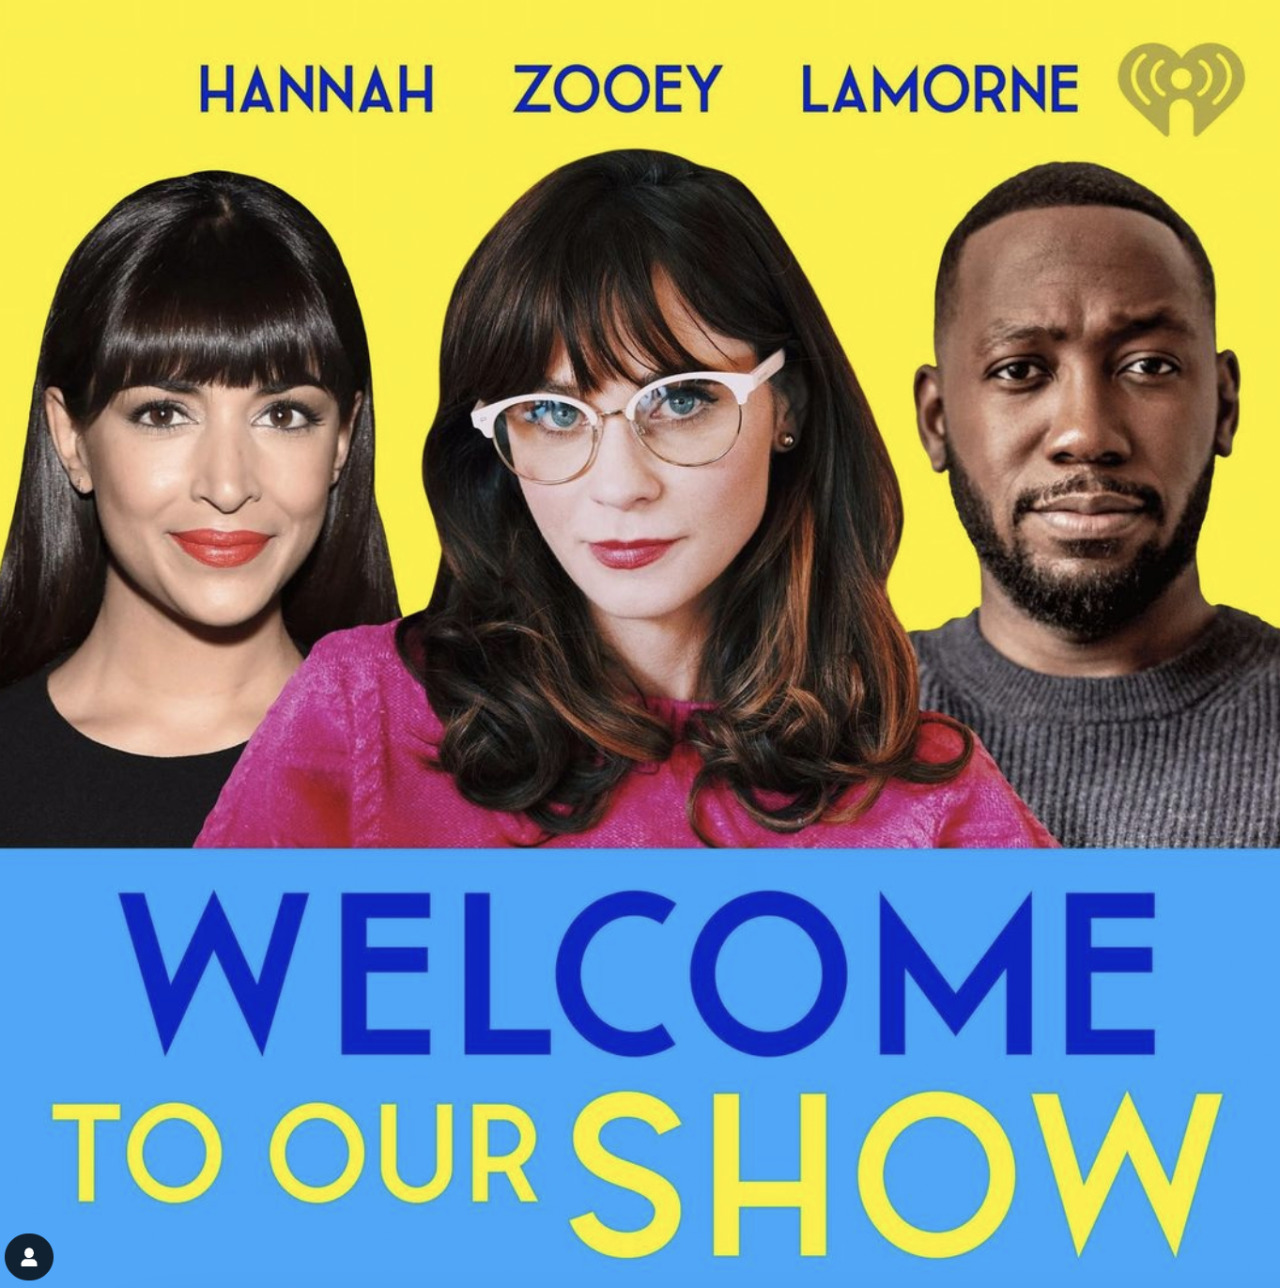 You can bet your ass I’m tuning in to this!!!!! So excited!!! I miss these clowns so much!!! #new girl#zooey deschanel#lamorne morris#hannah simone #welcome to our show #newgirl